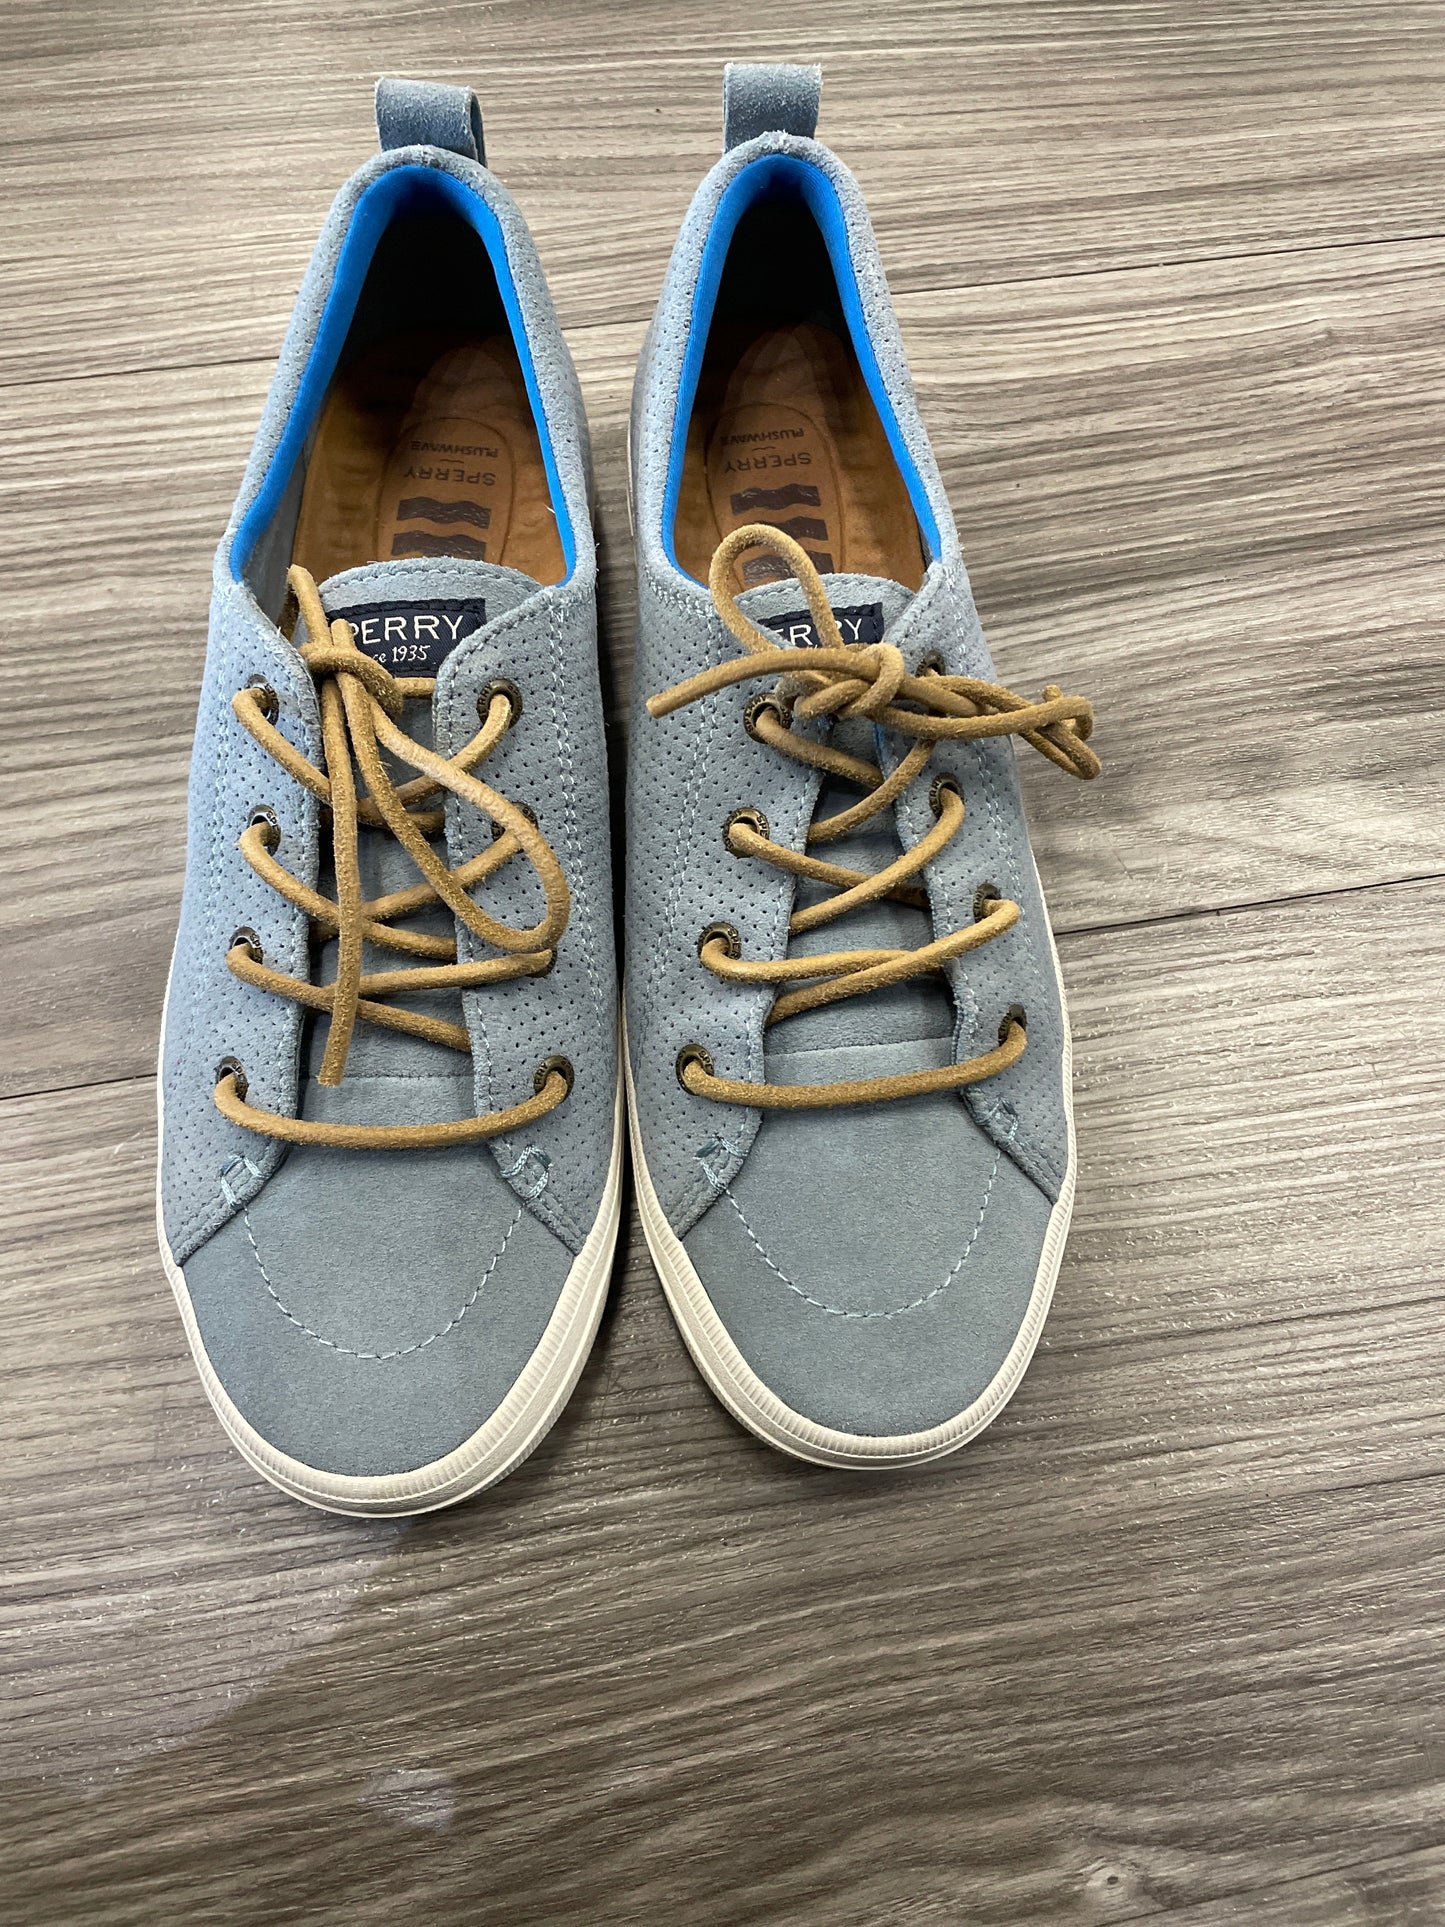 Blue Shoes Flats Sperry, Size 7.5